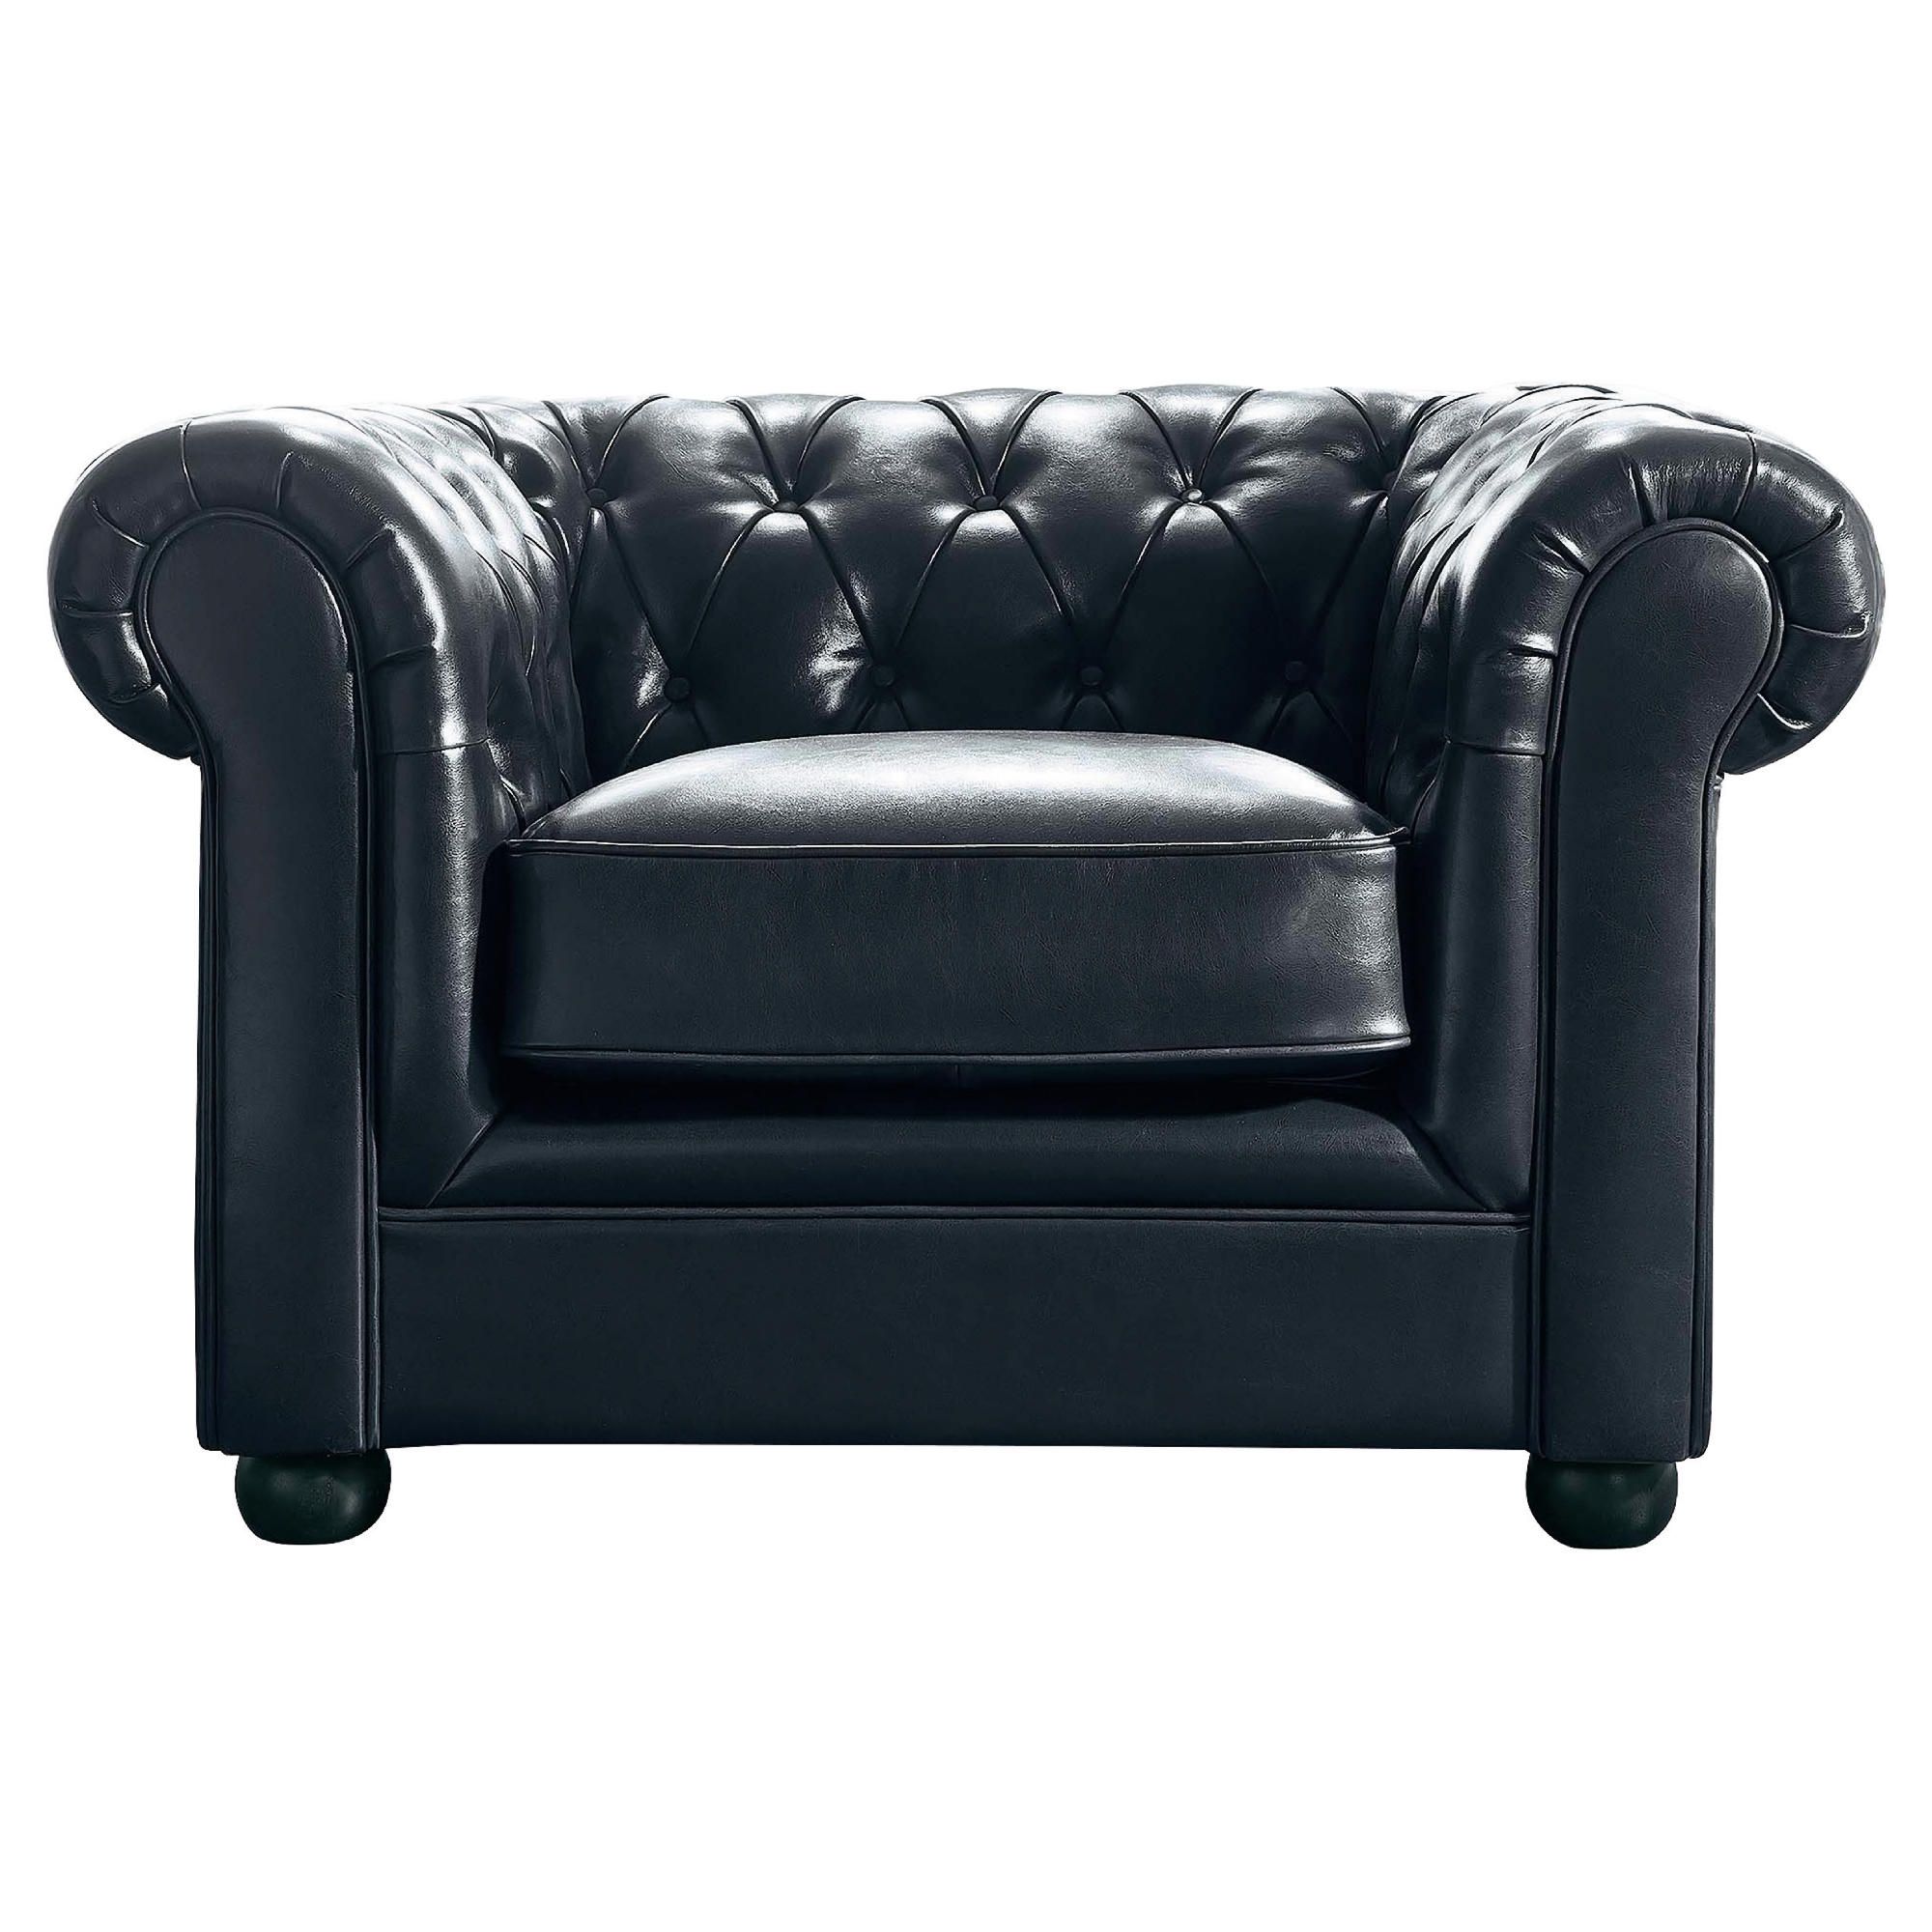 Chesterfield Leather Armchair, Black at Tesco Direct